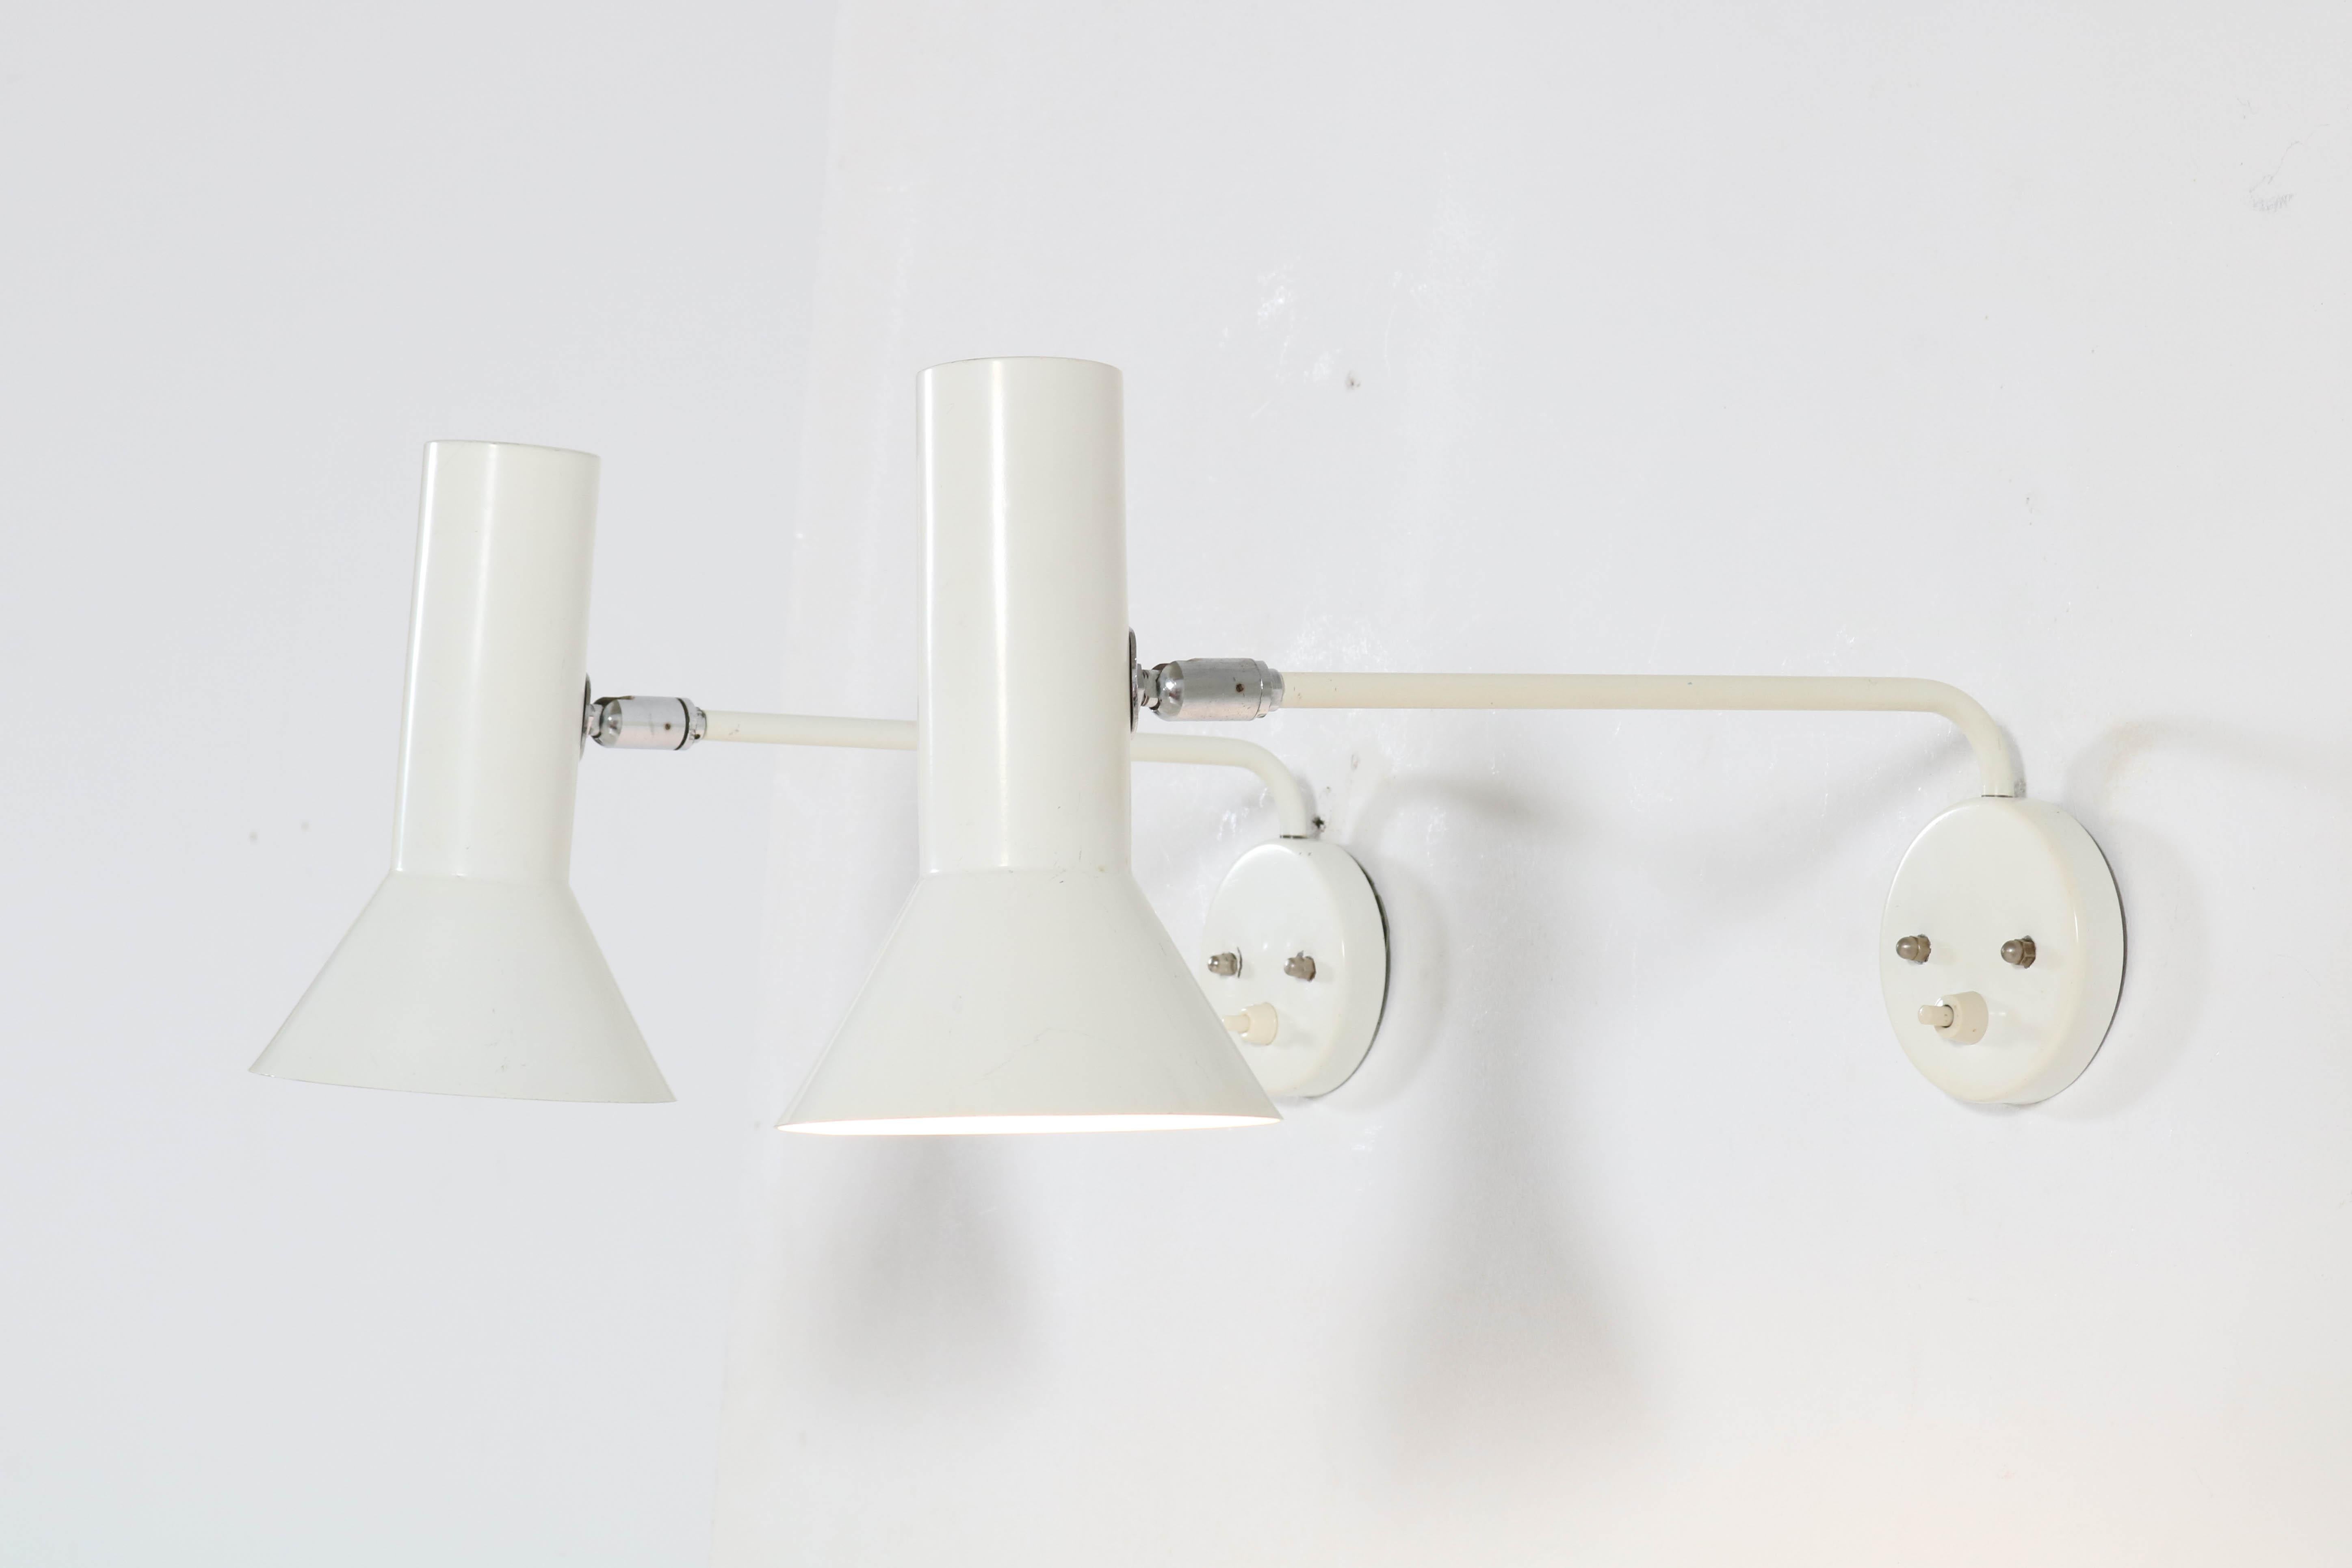 Metal Two Mid-Century Modern Wall Lights or Sconces by RAAK, Amsterdam, 1960s